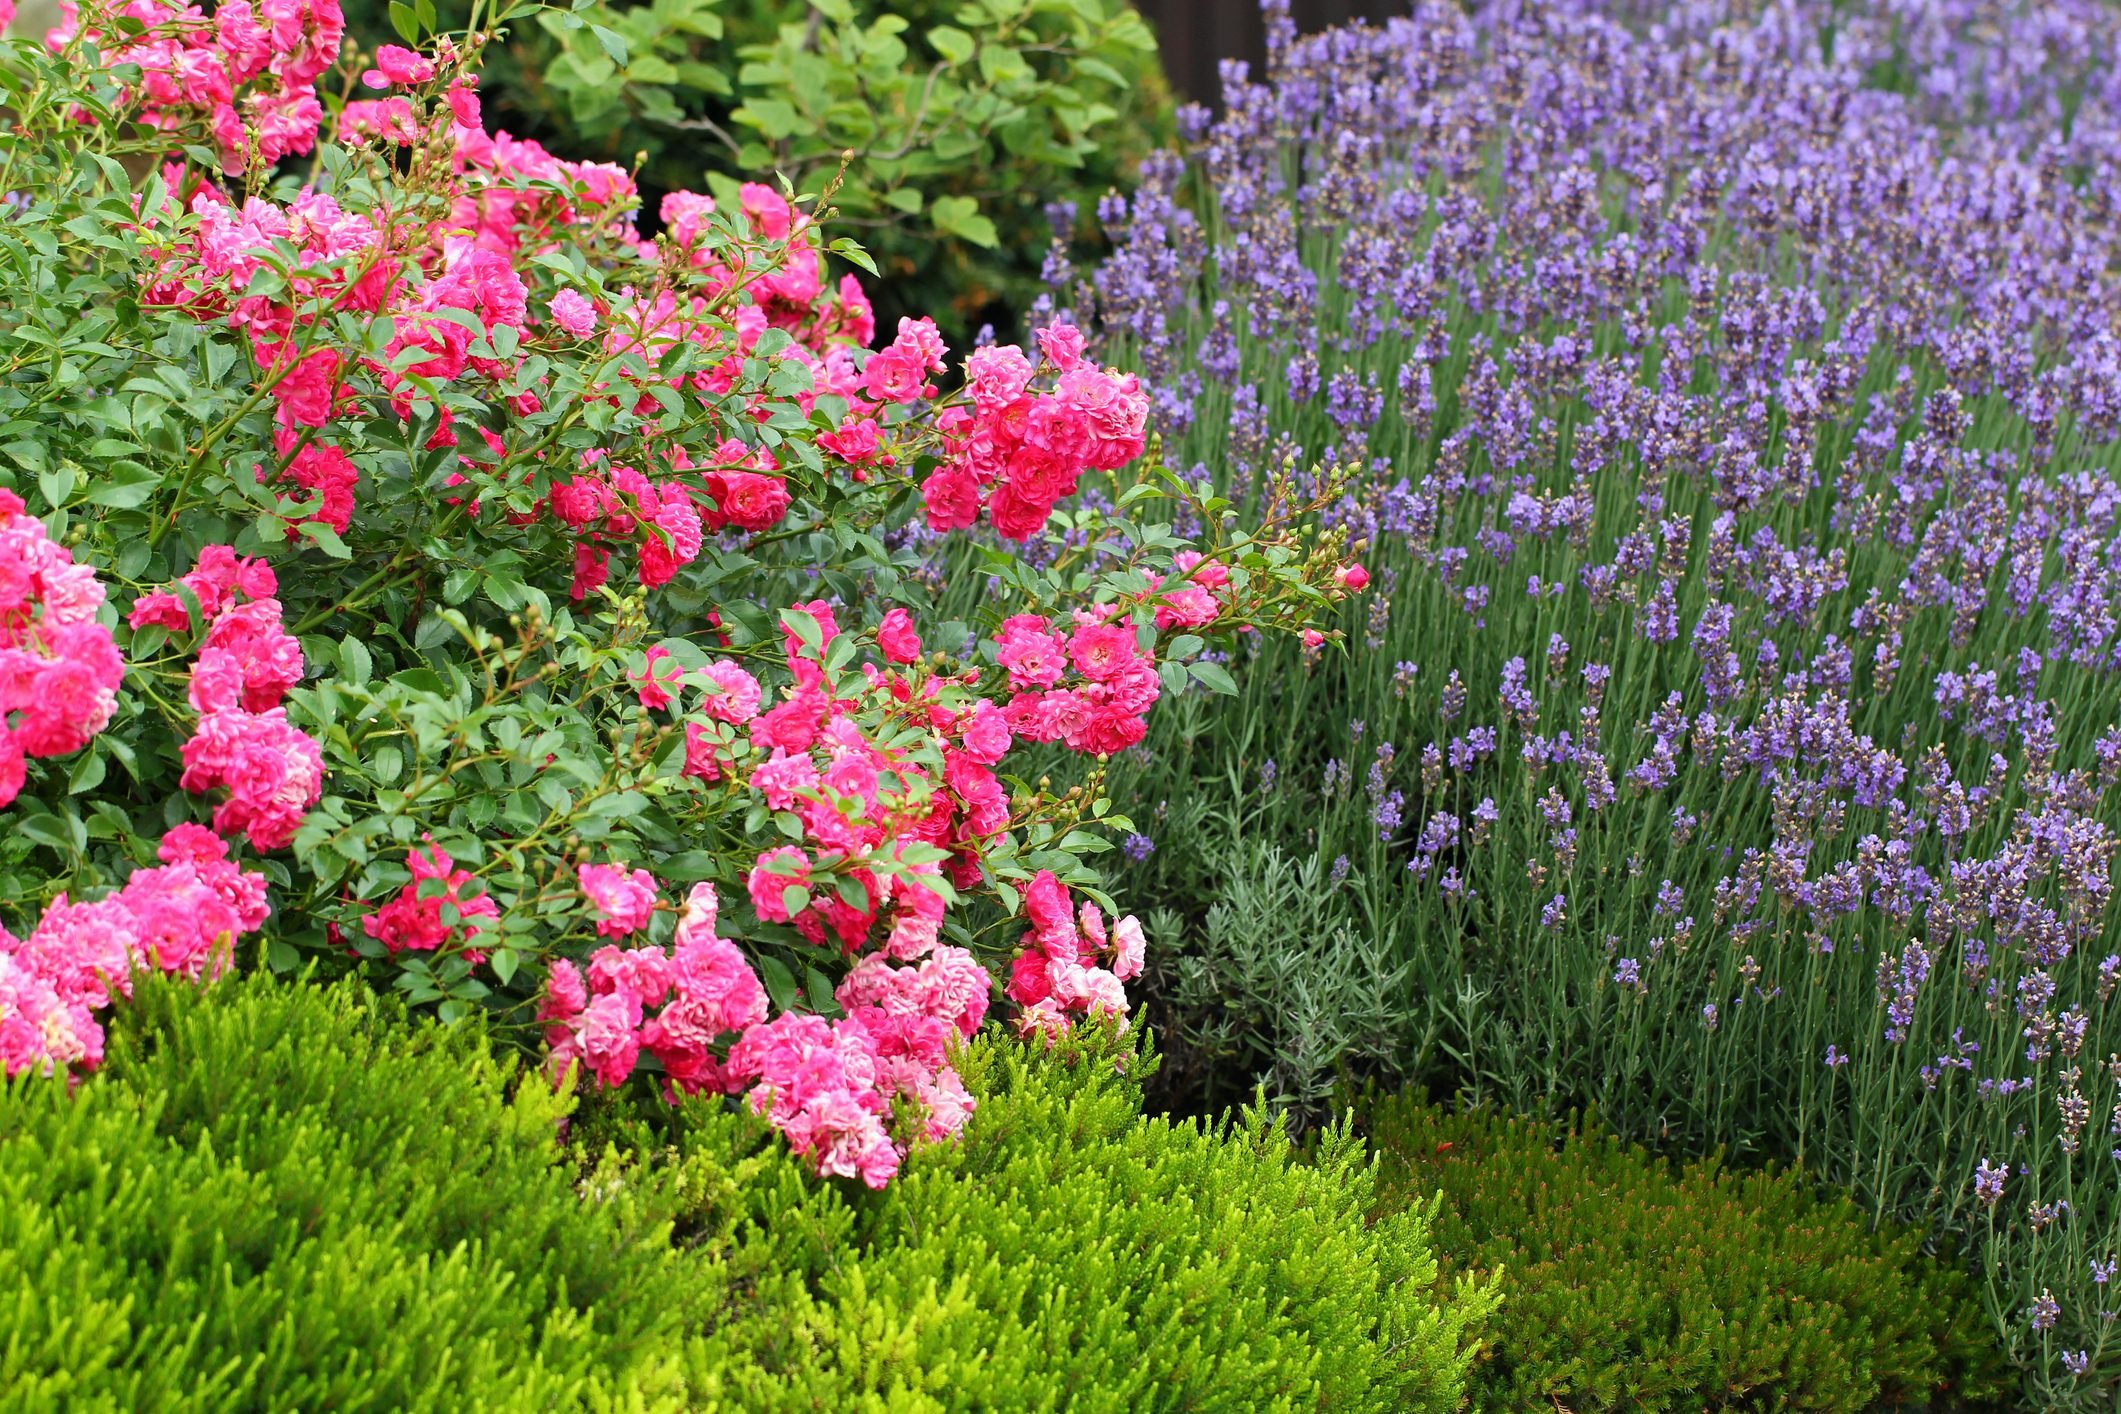 The Top 10 Best Companion Plants for Roses